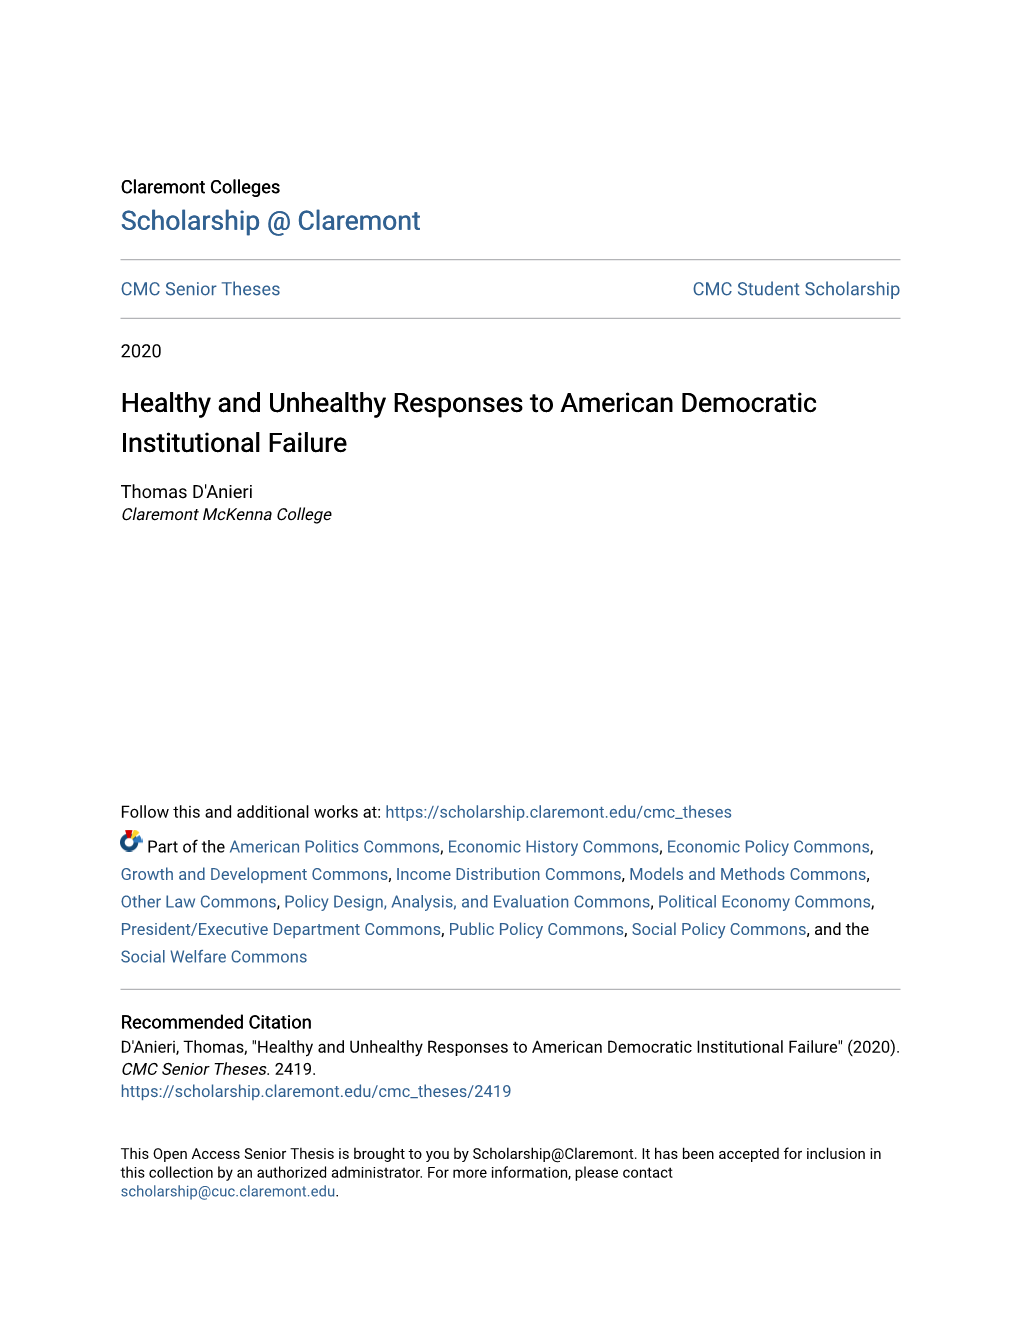 Healthy and Unhealthy Responses to American Democratic Institutional Failure